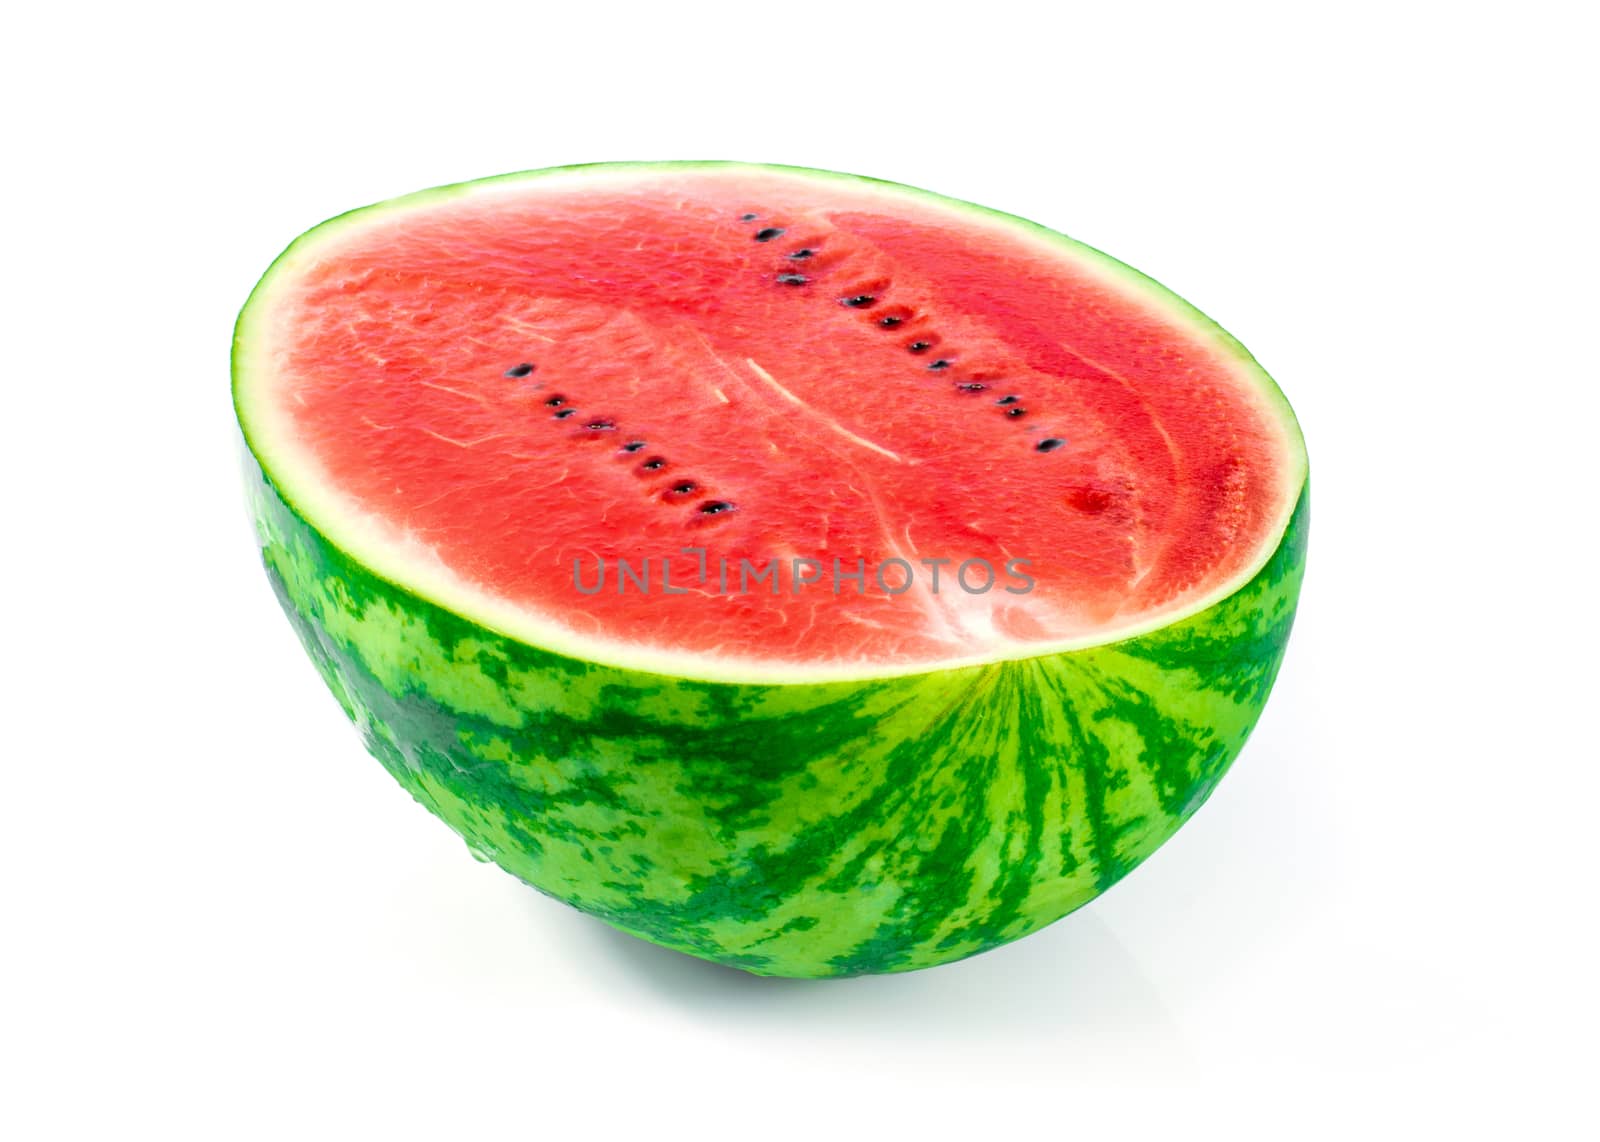 Fruit watermelon cut in half on the white ground